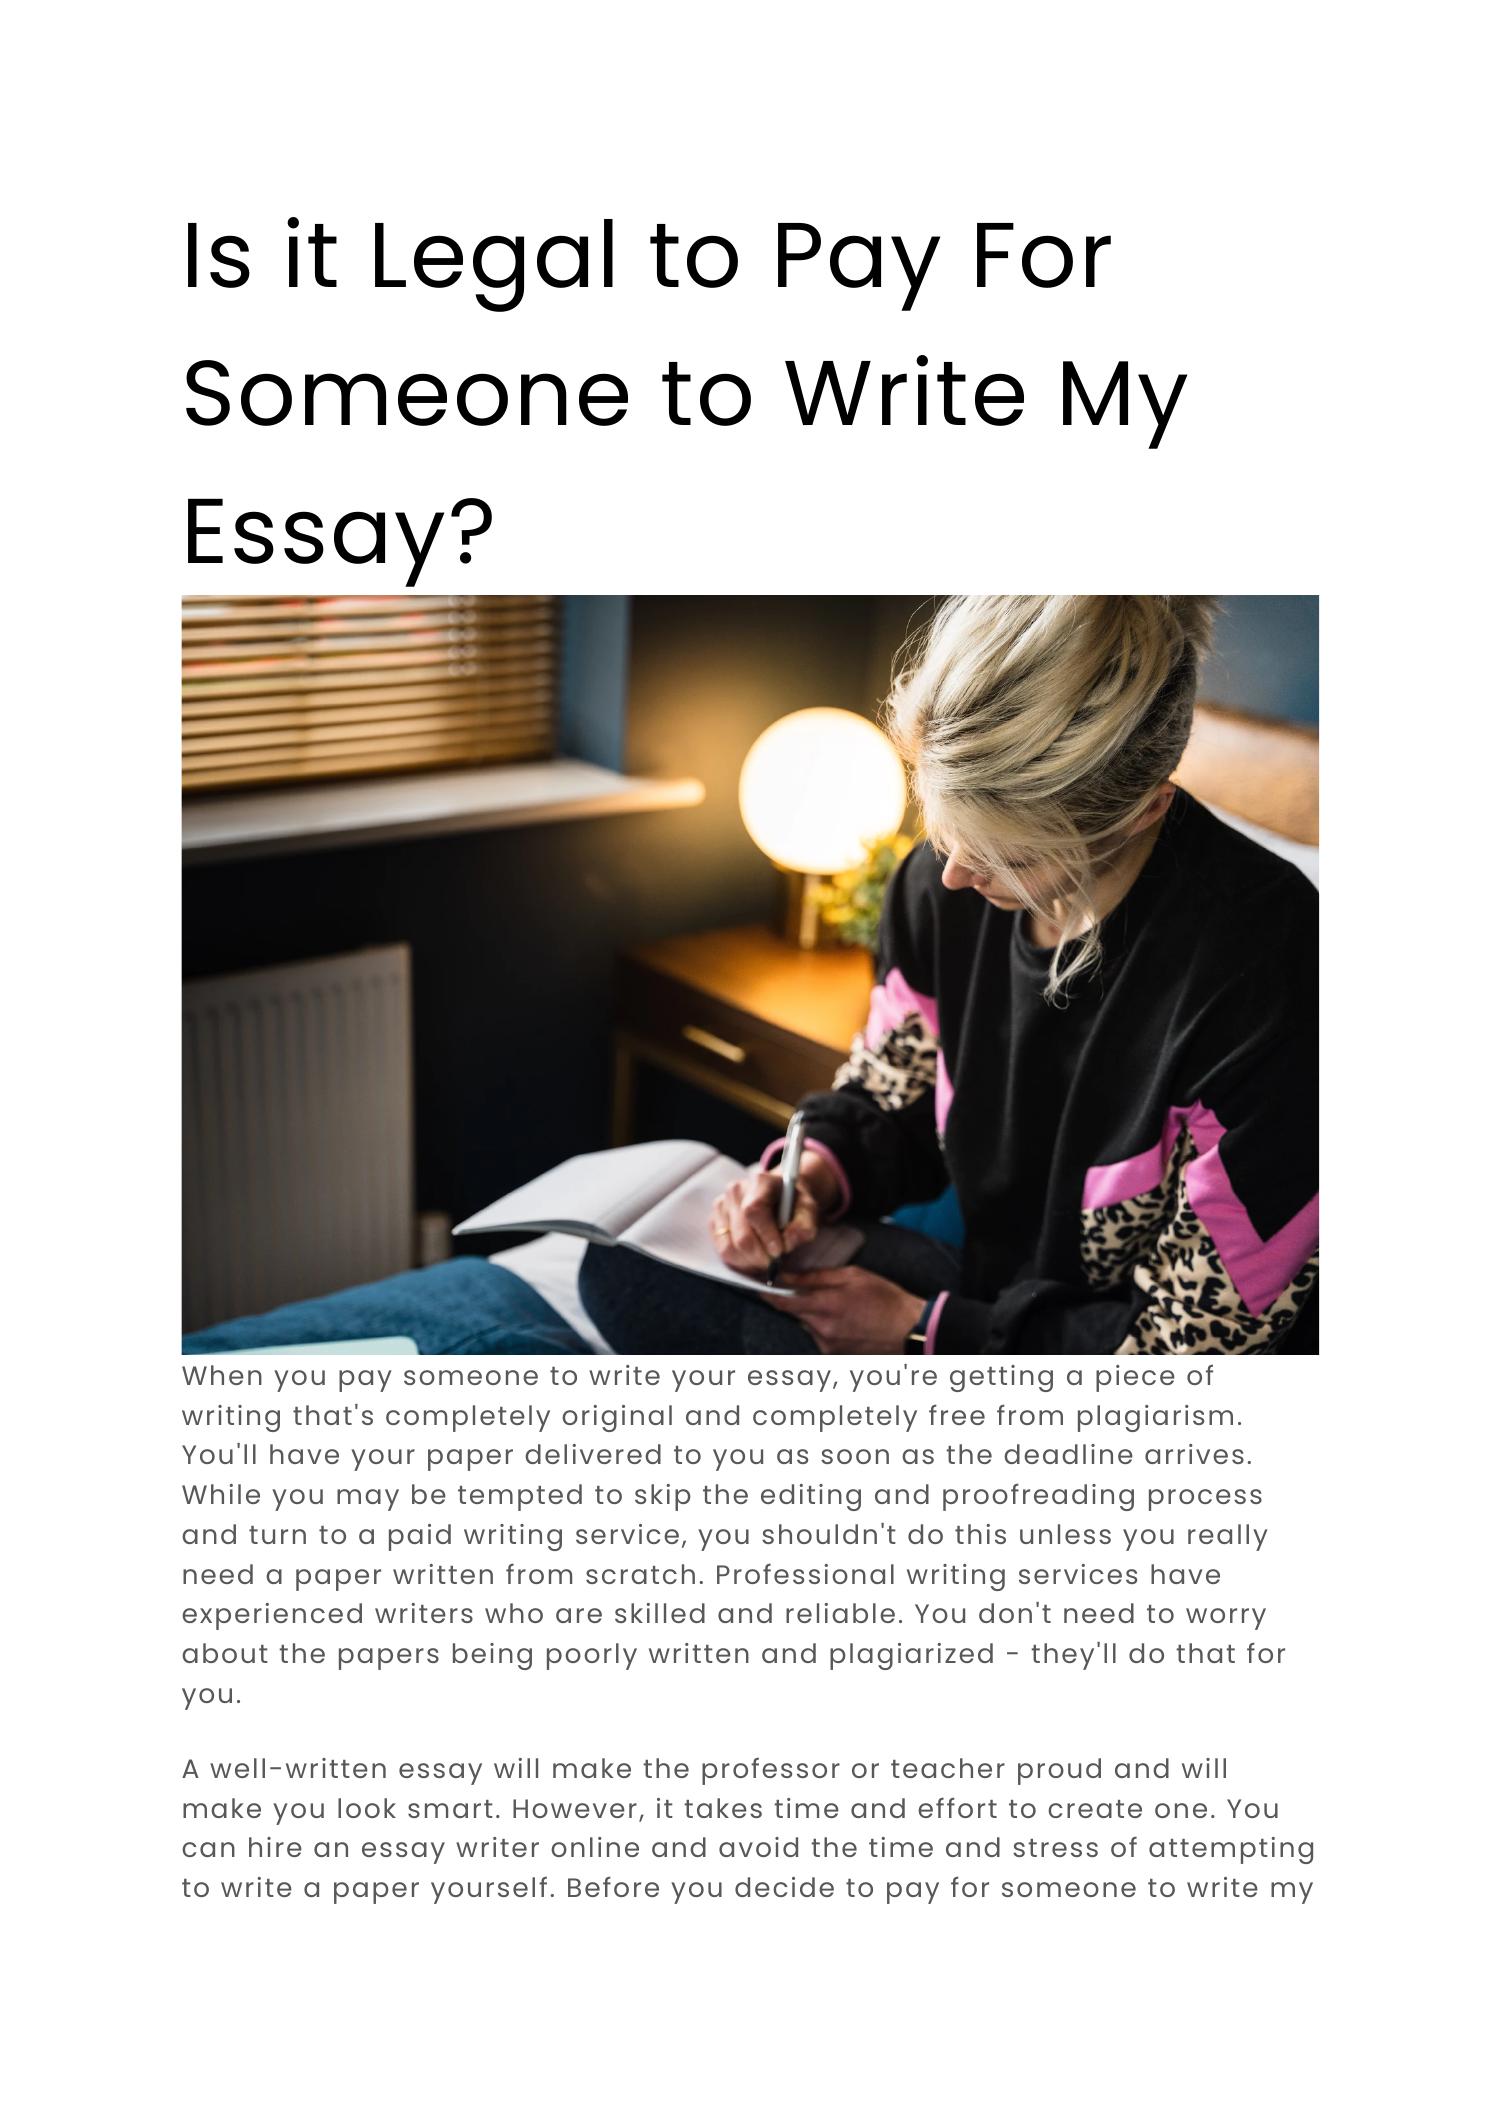 is it illegal to pay someone to write your essay